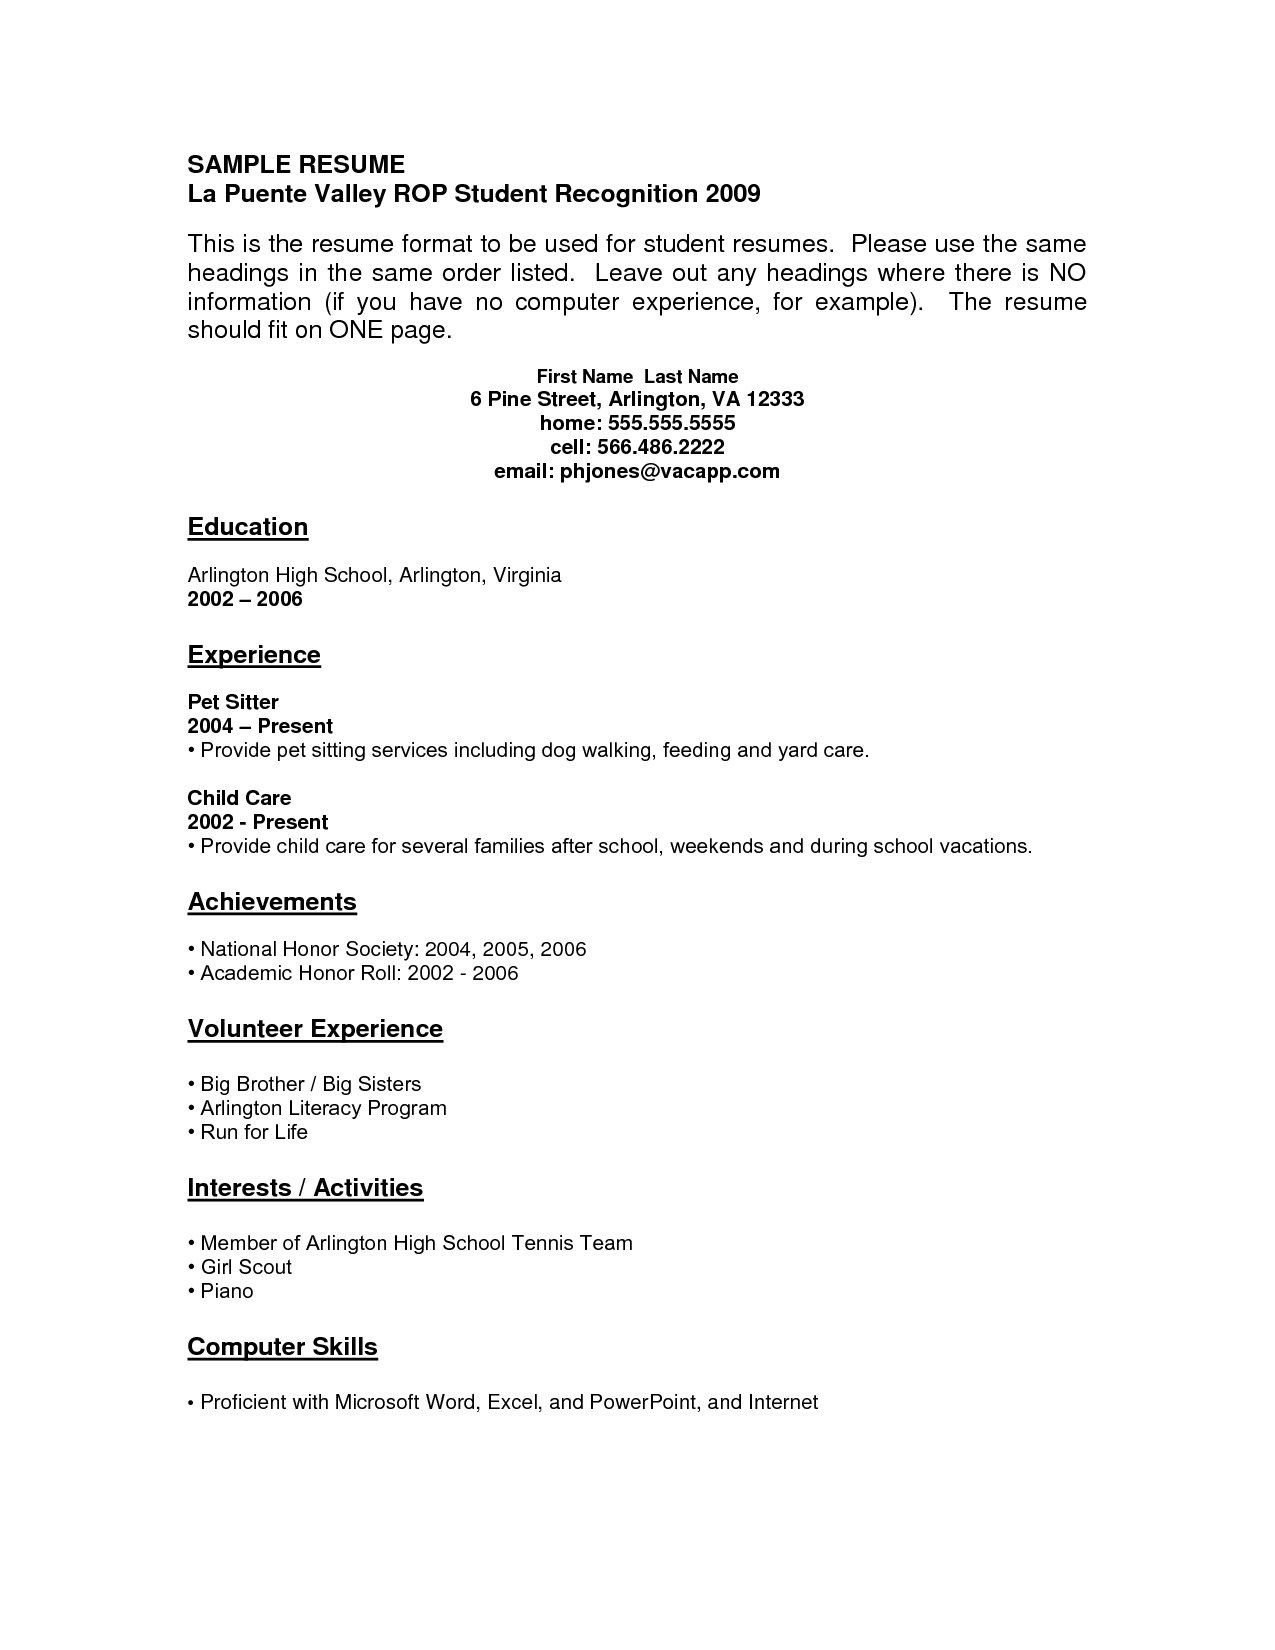 Sample Resume High School Applying for Job No Experience Resume Examples with No Job Experience – Resume Templates Resume …